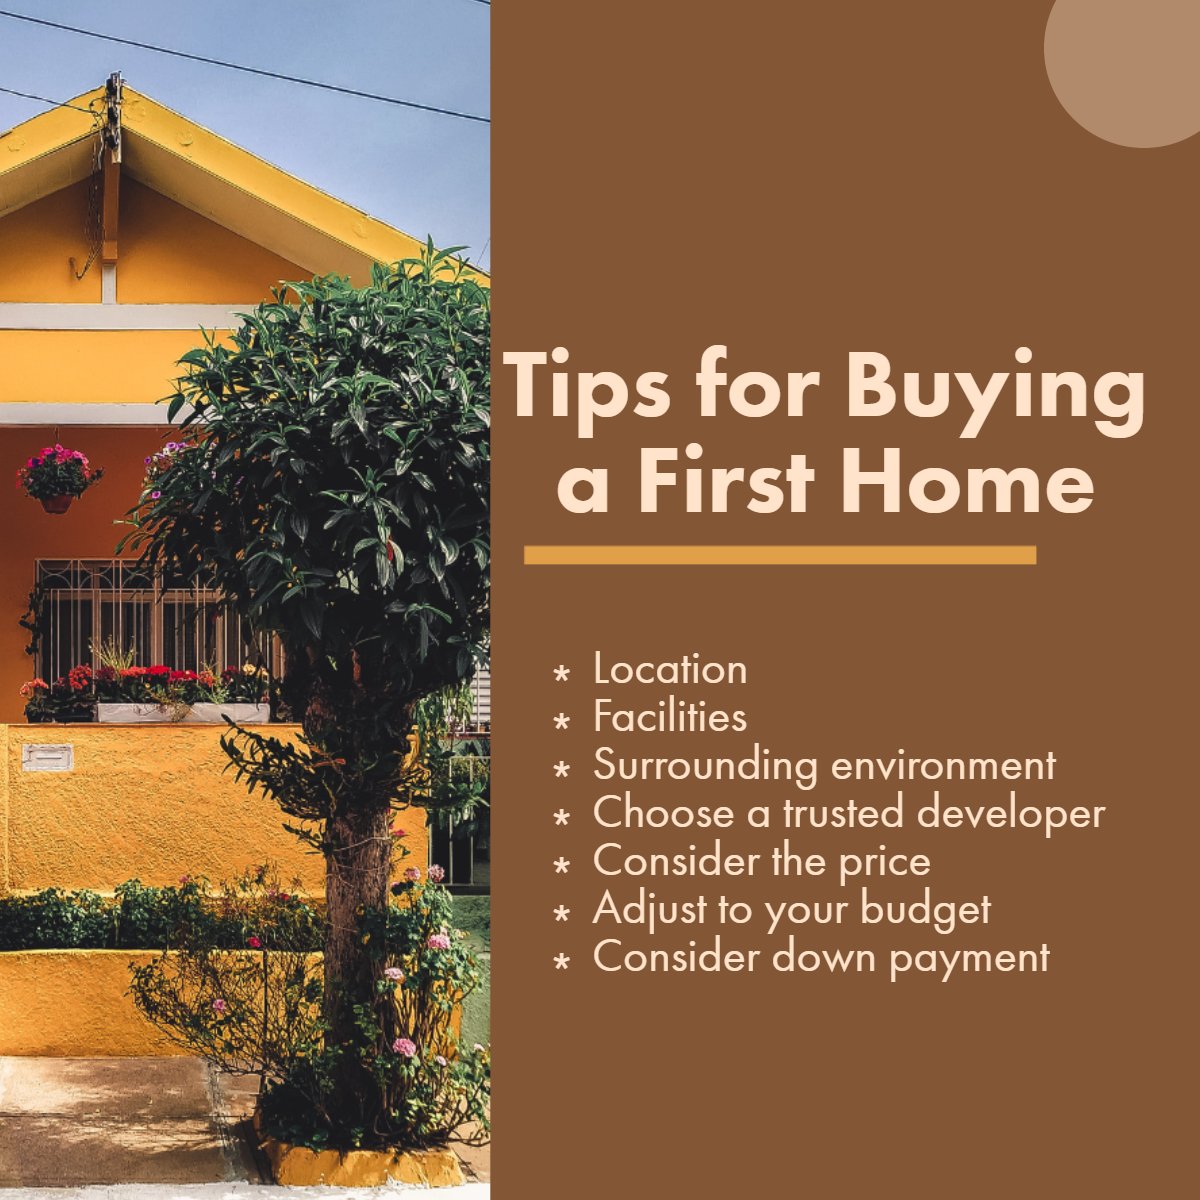 How was your experience buying your first home?

Share it below!

#homebuying    #homebuyingexperience
#RacingRealEstateAgent #BarrettRealEstate #StoneTreeRealEstateTeam #maricopaazrealestate #racingagent #arizonarealestate #phoenixrealestateagent #nascarfanrealtor